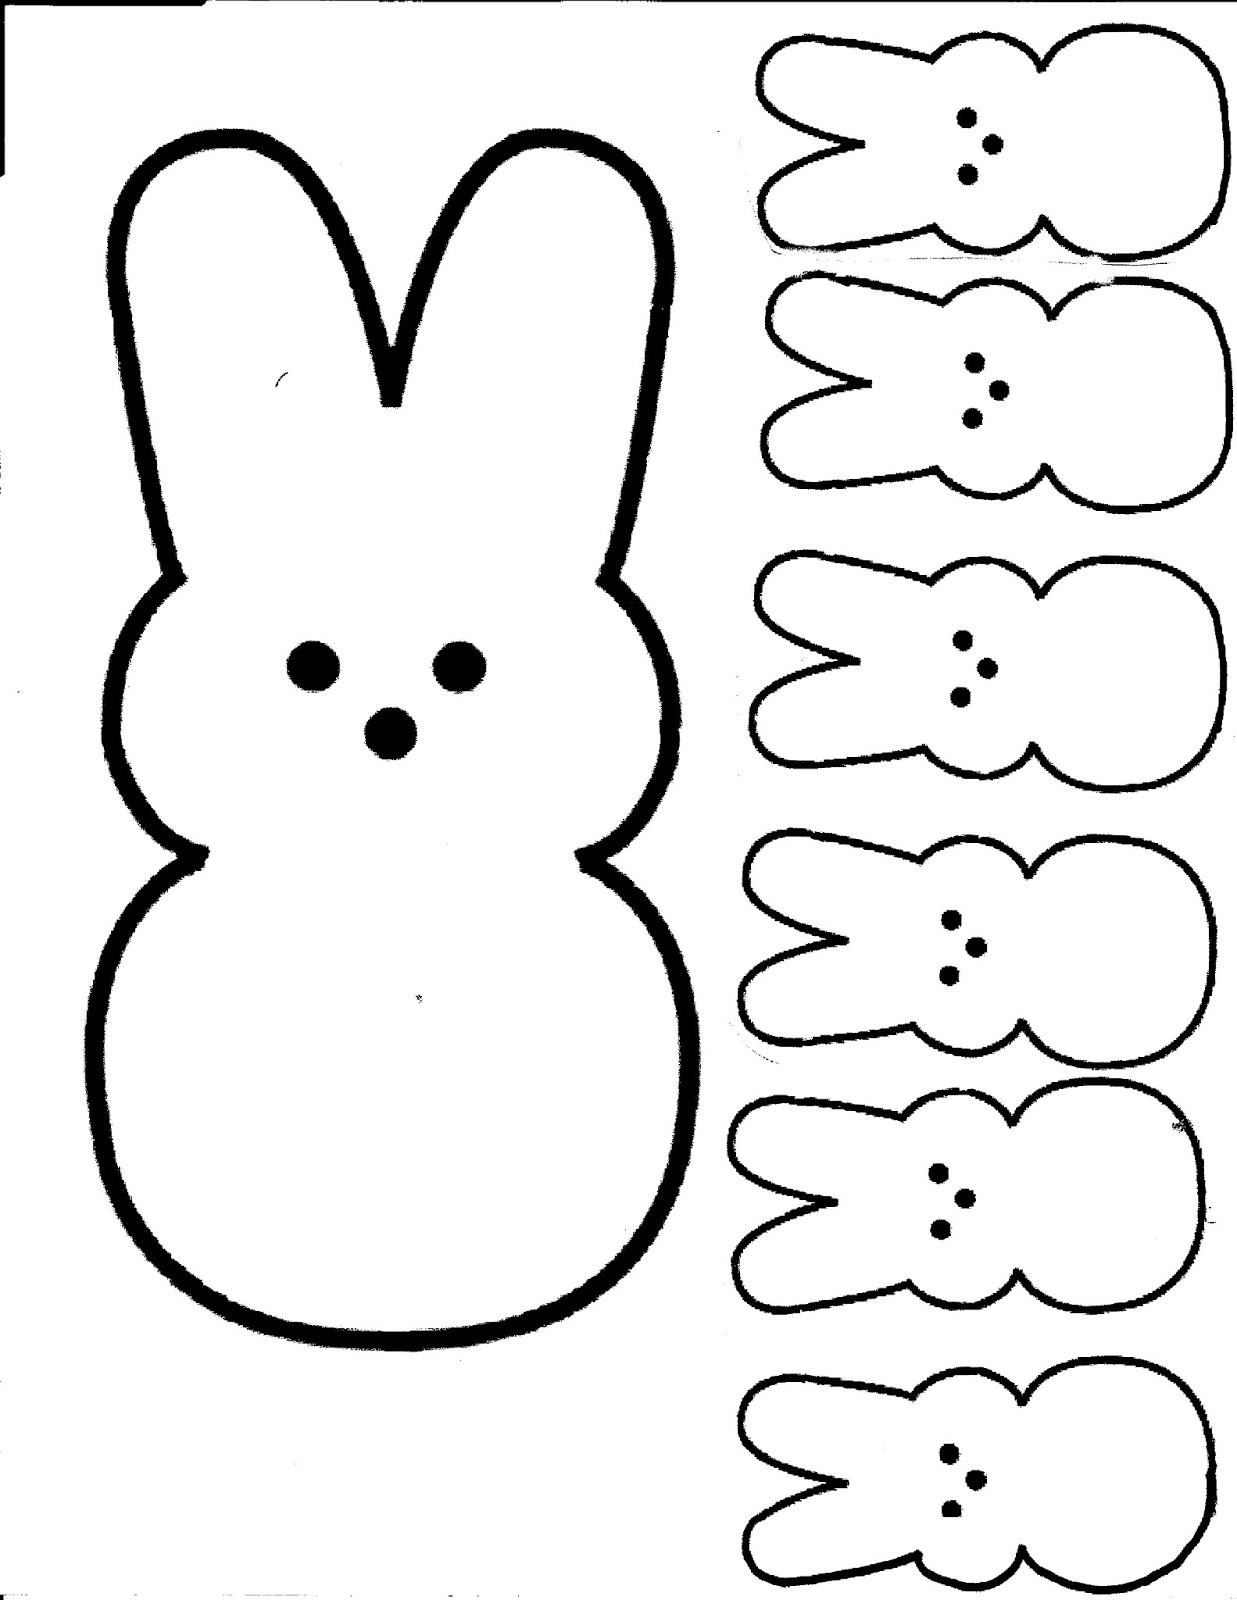 Easter candy clipart black and white - ClipartFest